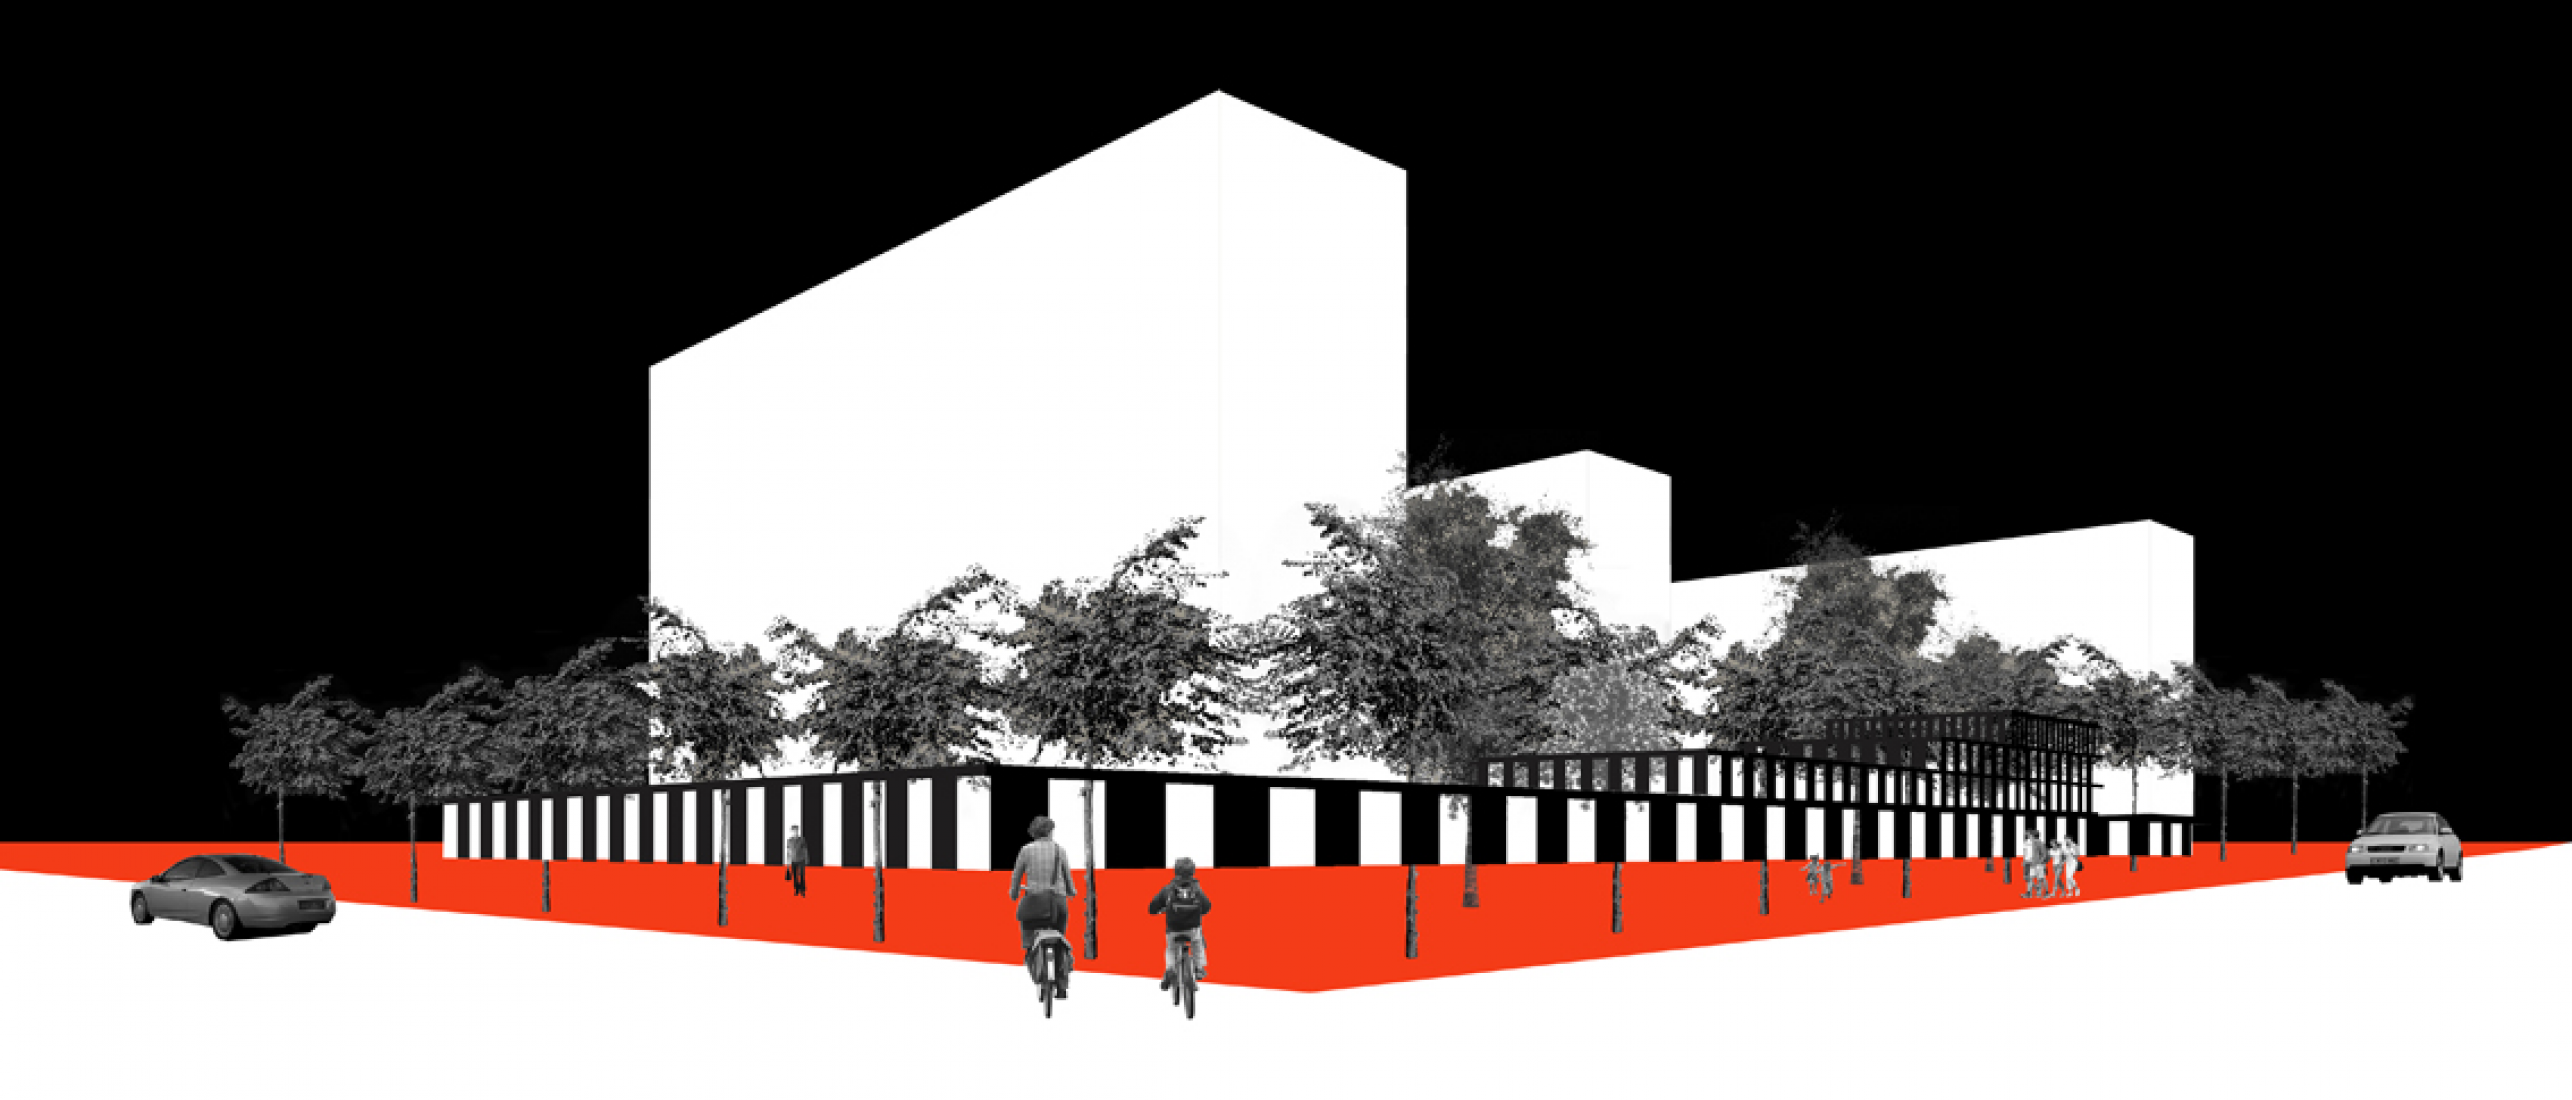 View from the street. Competition, 1st Prize. Europan 12. By Adrià Guardiet.